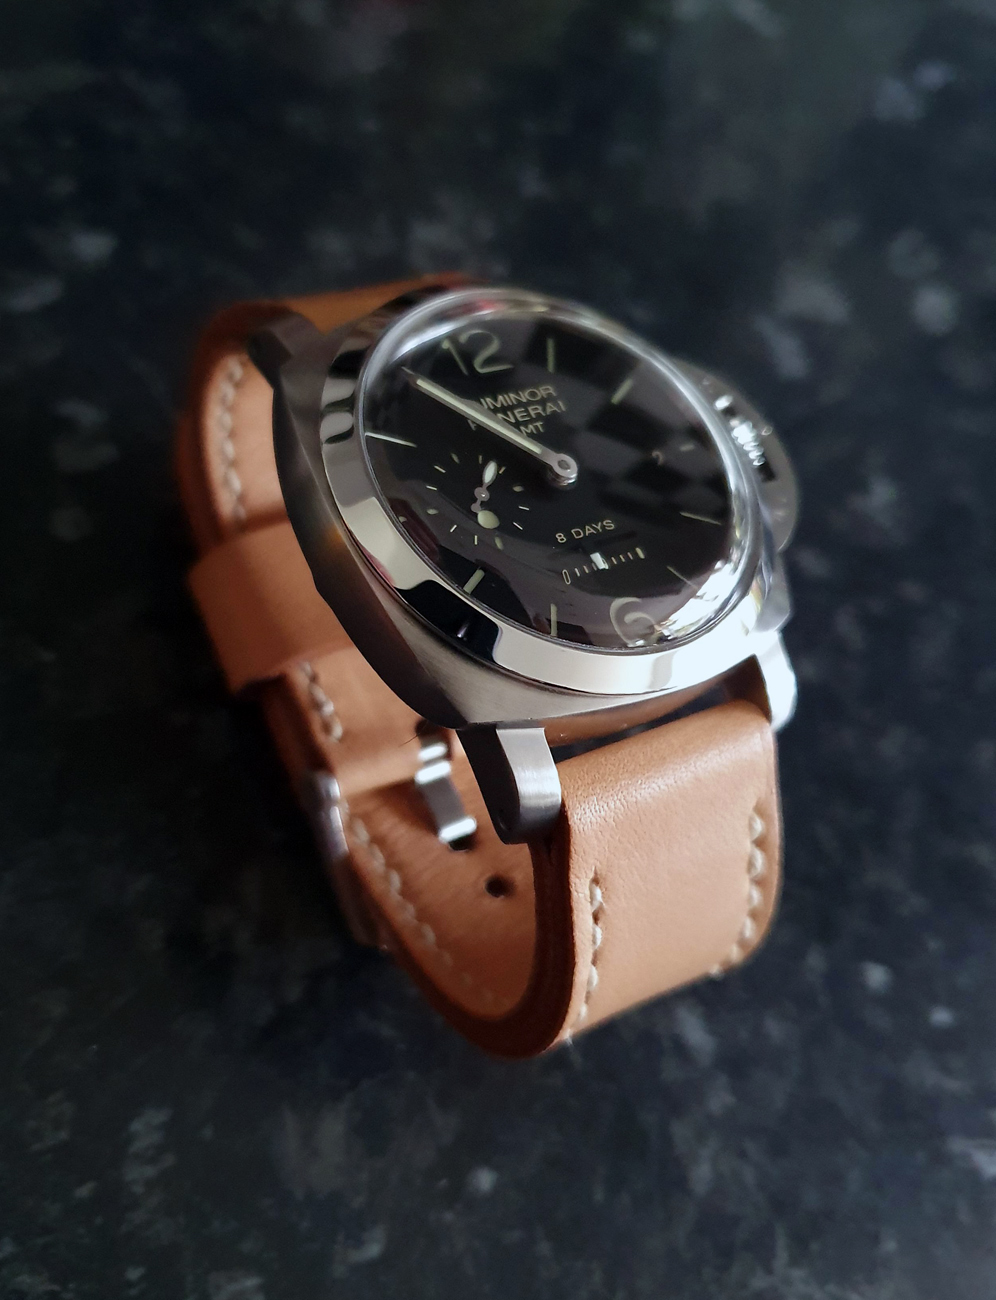 Panerai PAM233 on Horween Essex leather with natural stitching. © Glen Richardson